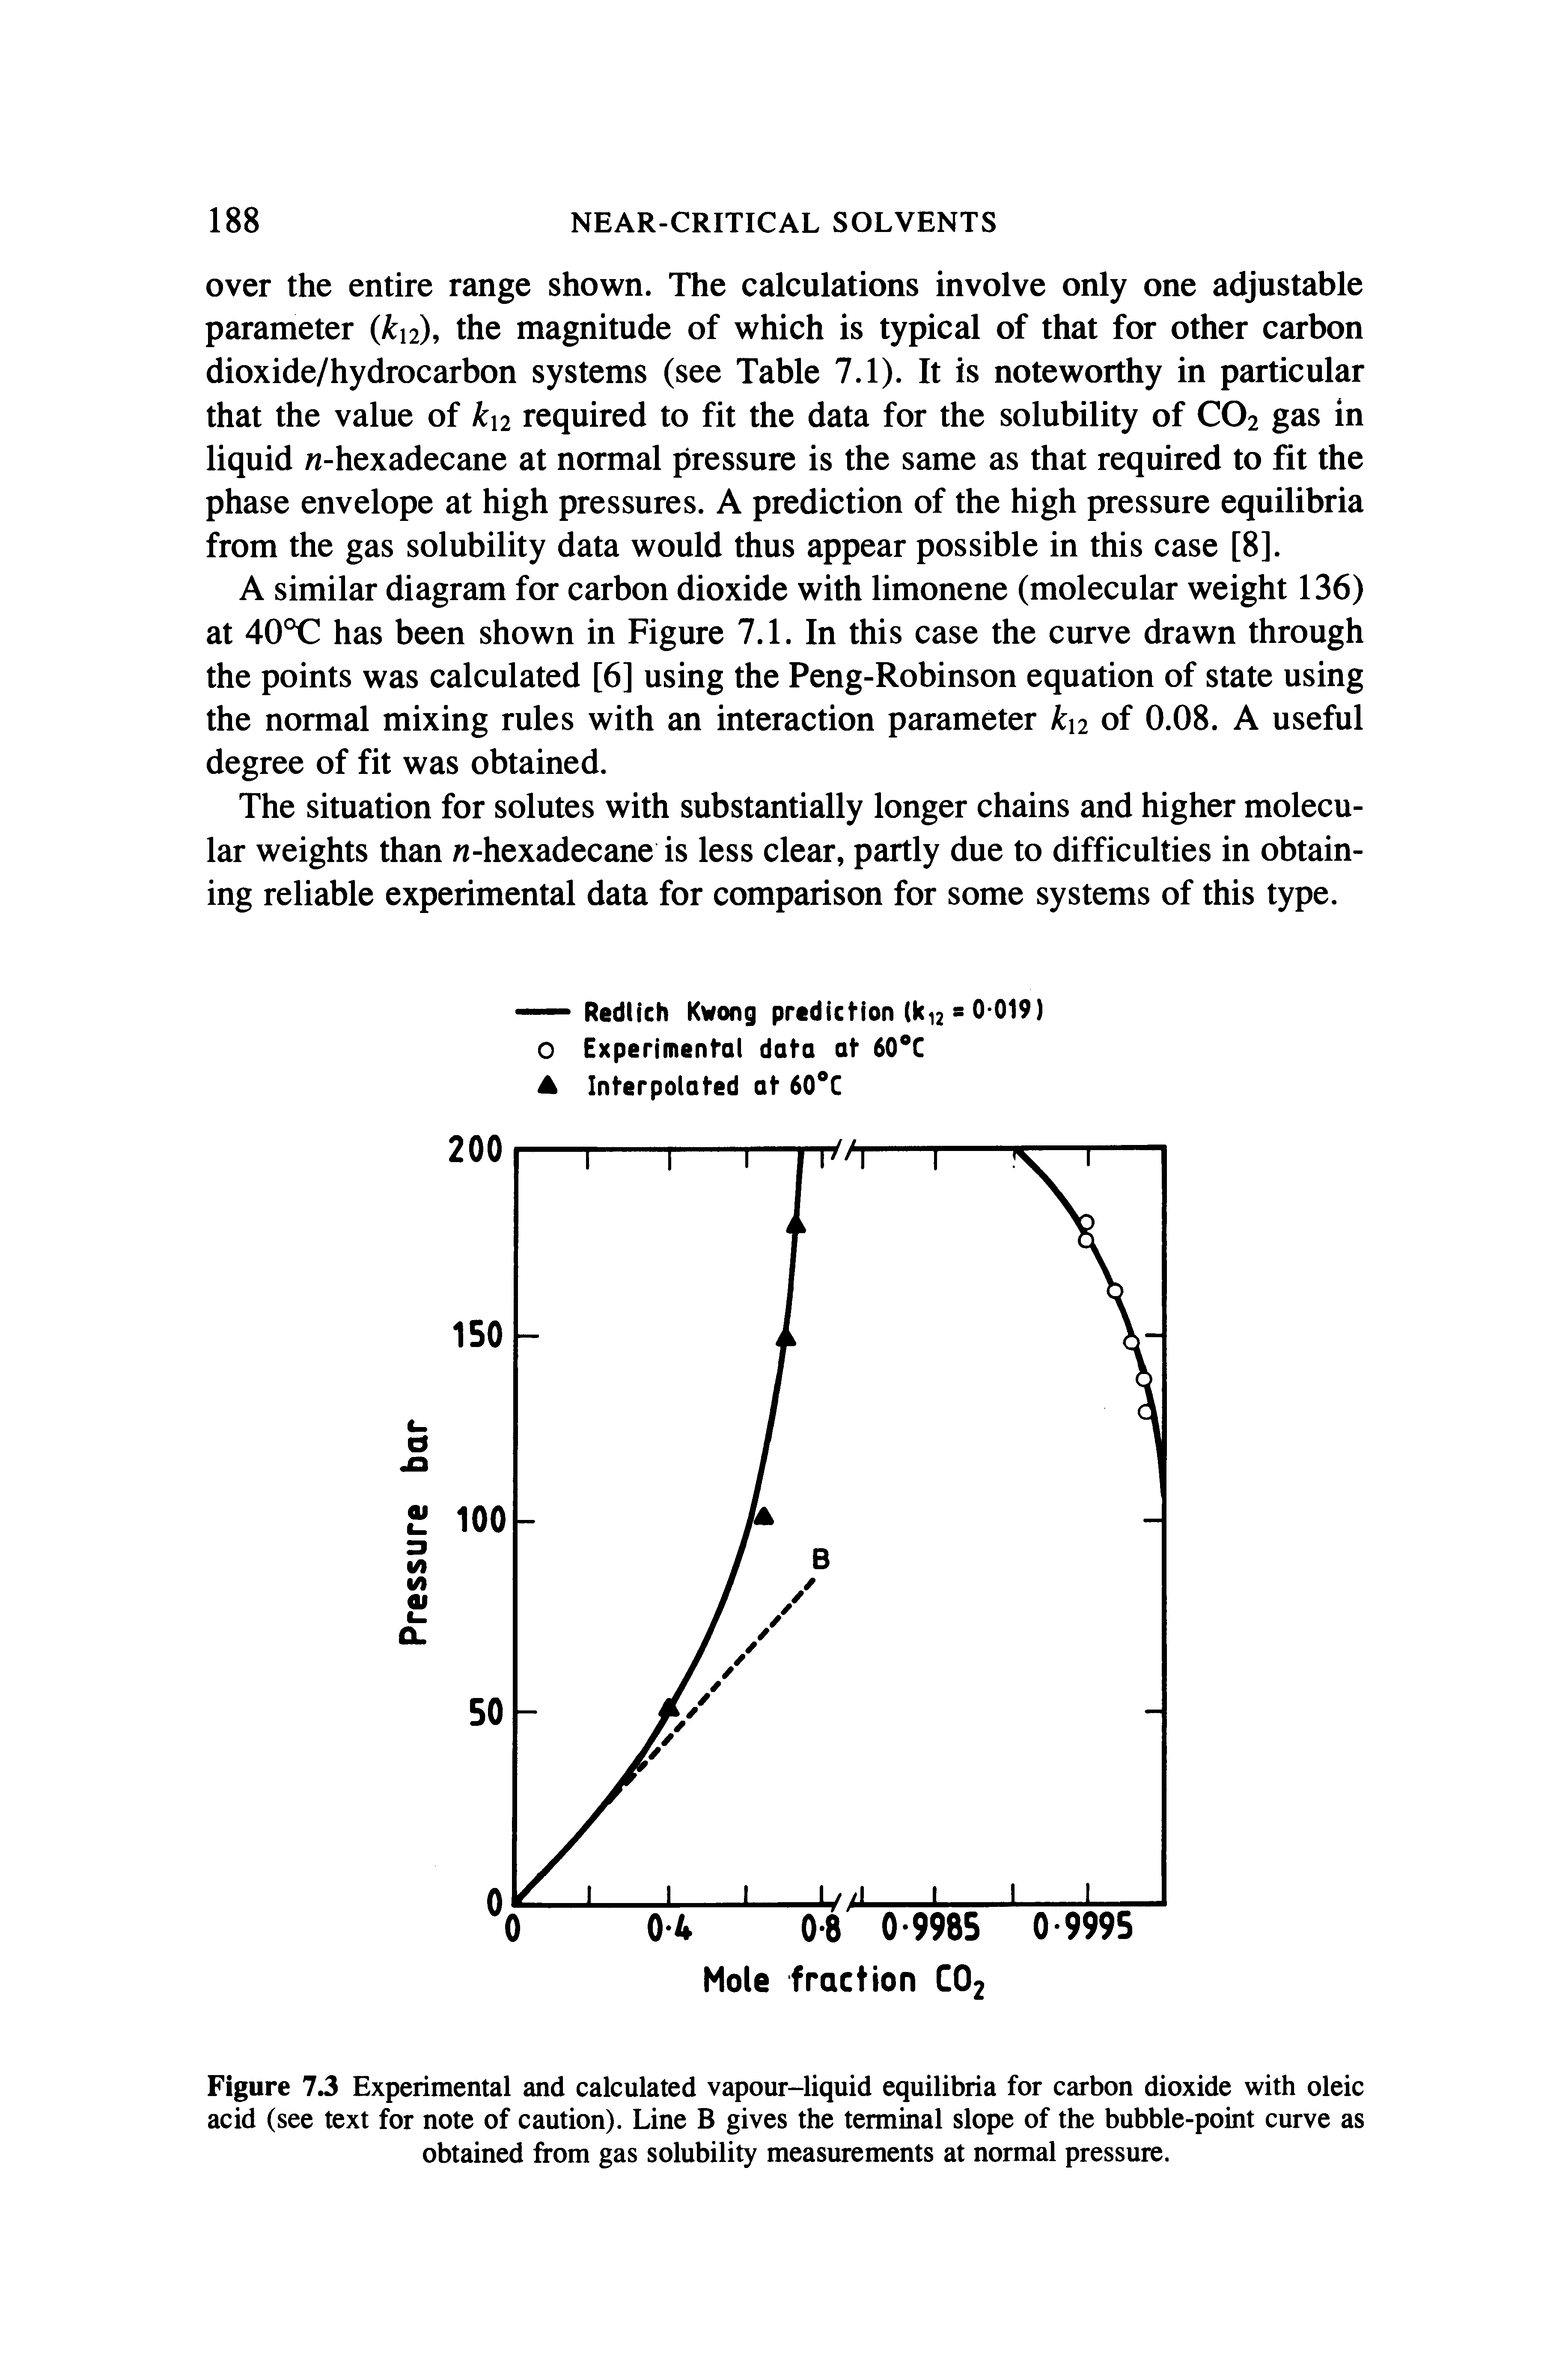 Figure 73 Experimental and calculated vapour-liquid equilibria for carbon dioxide with oleic acid (see text for note of caution). Line B gives the terminal slope of the bubble-point curve as obtained from gas solubility measurements at normal pressure.